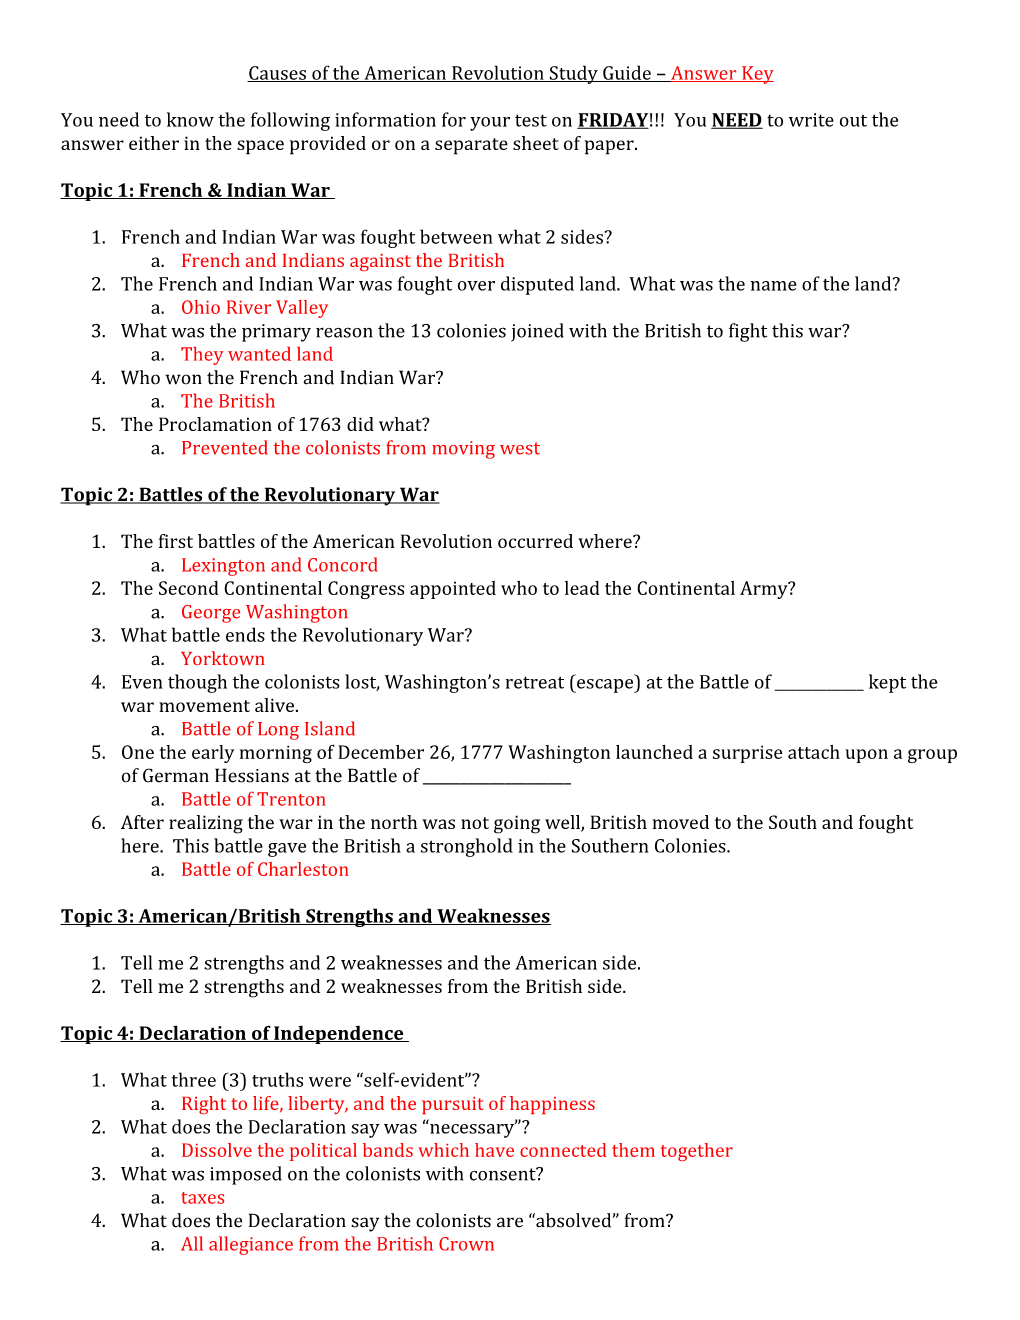 Causes of the American Revolution Study Guide Answer Key